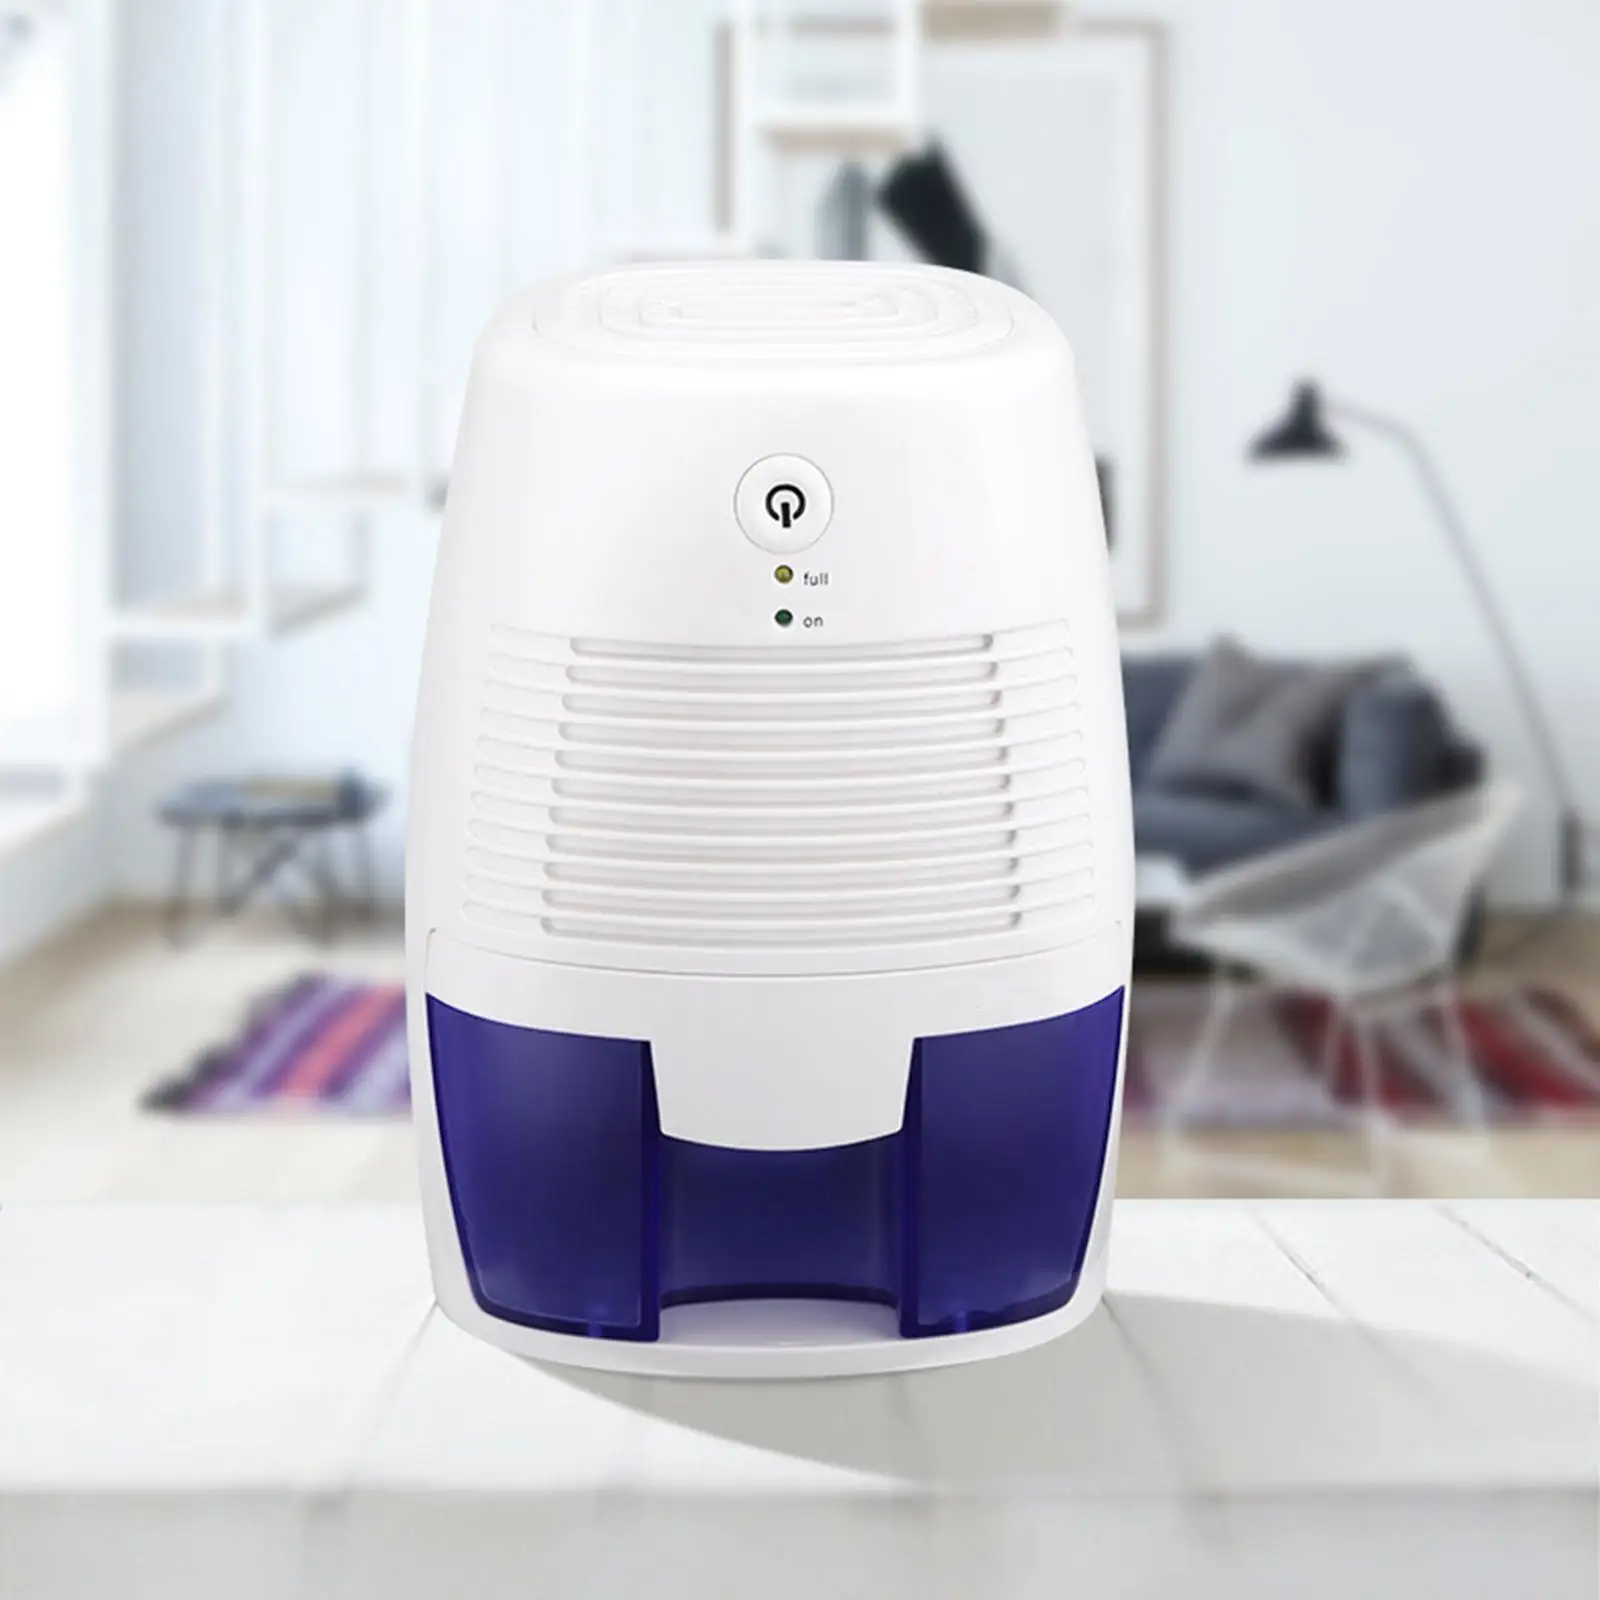  Dehumidifier Air Dryer 500ml Moisture Absorber with Auto Shut Portable for Bathroom RV Office Bedroom Home